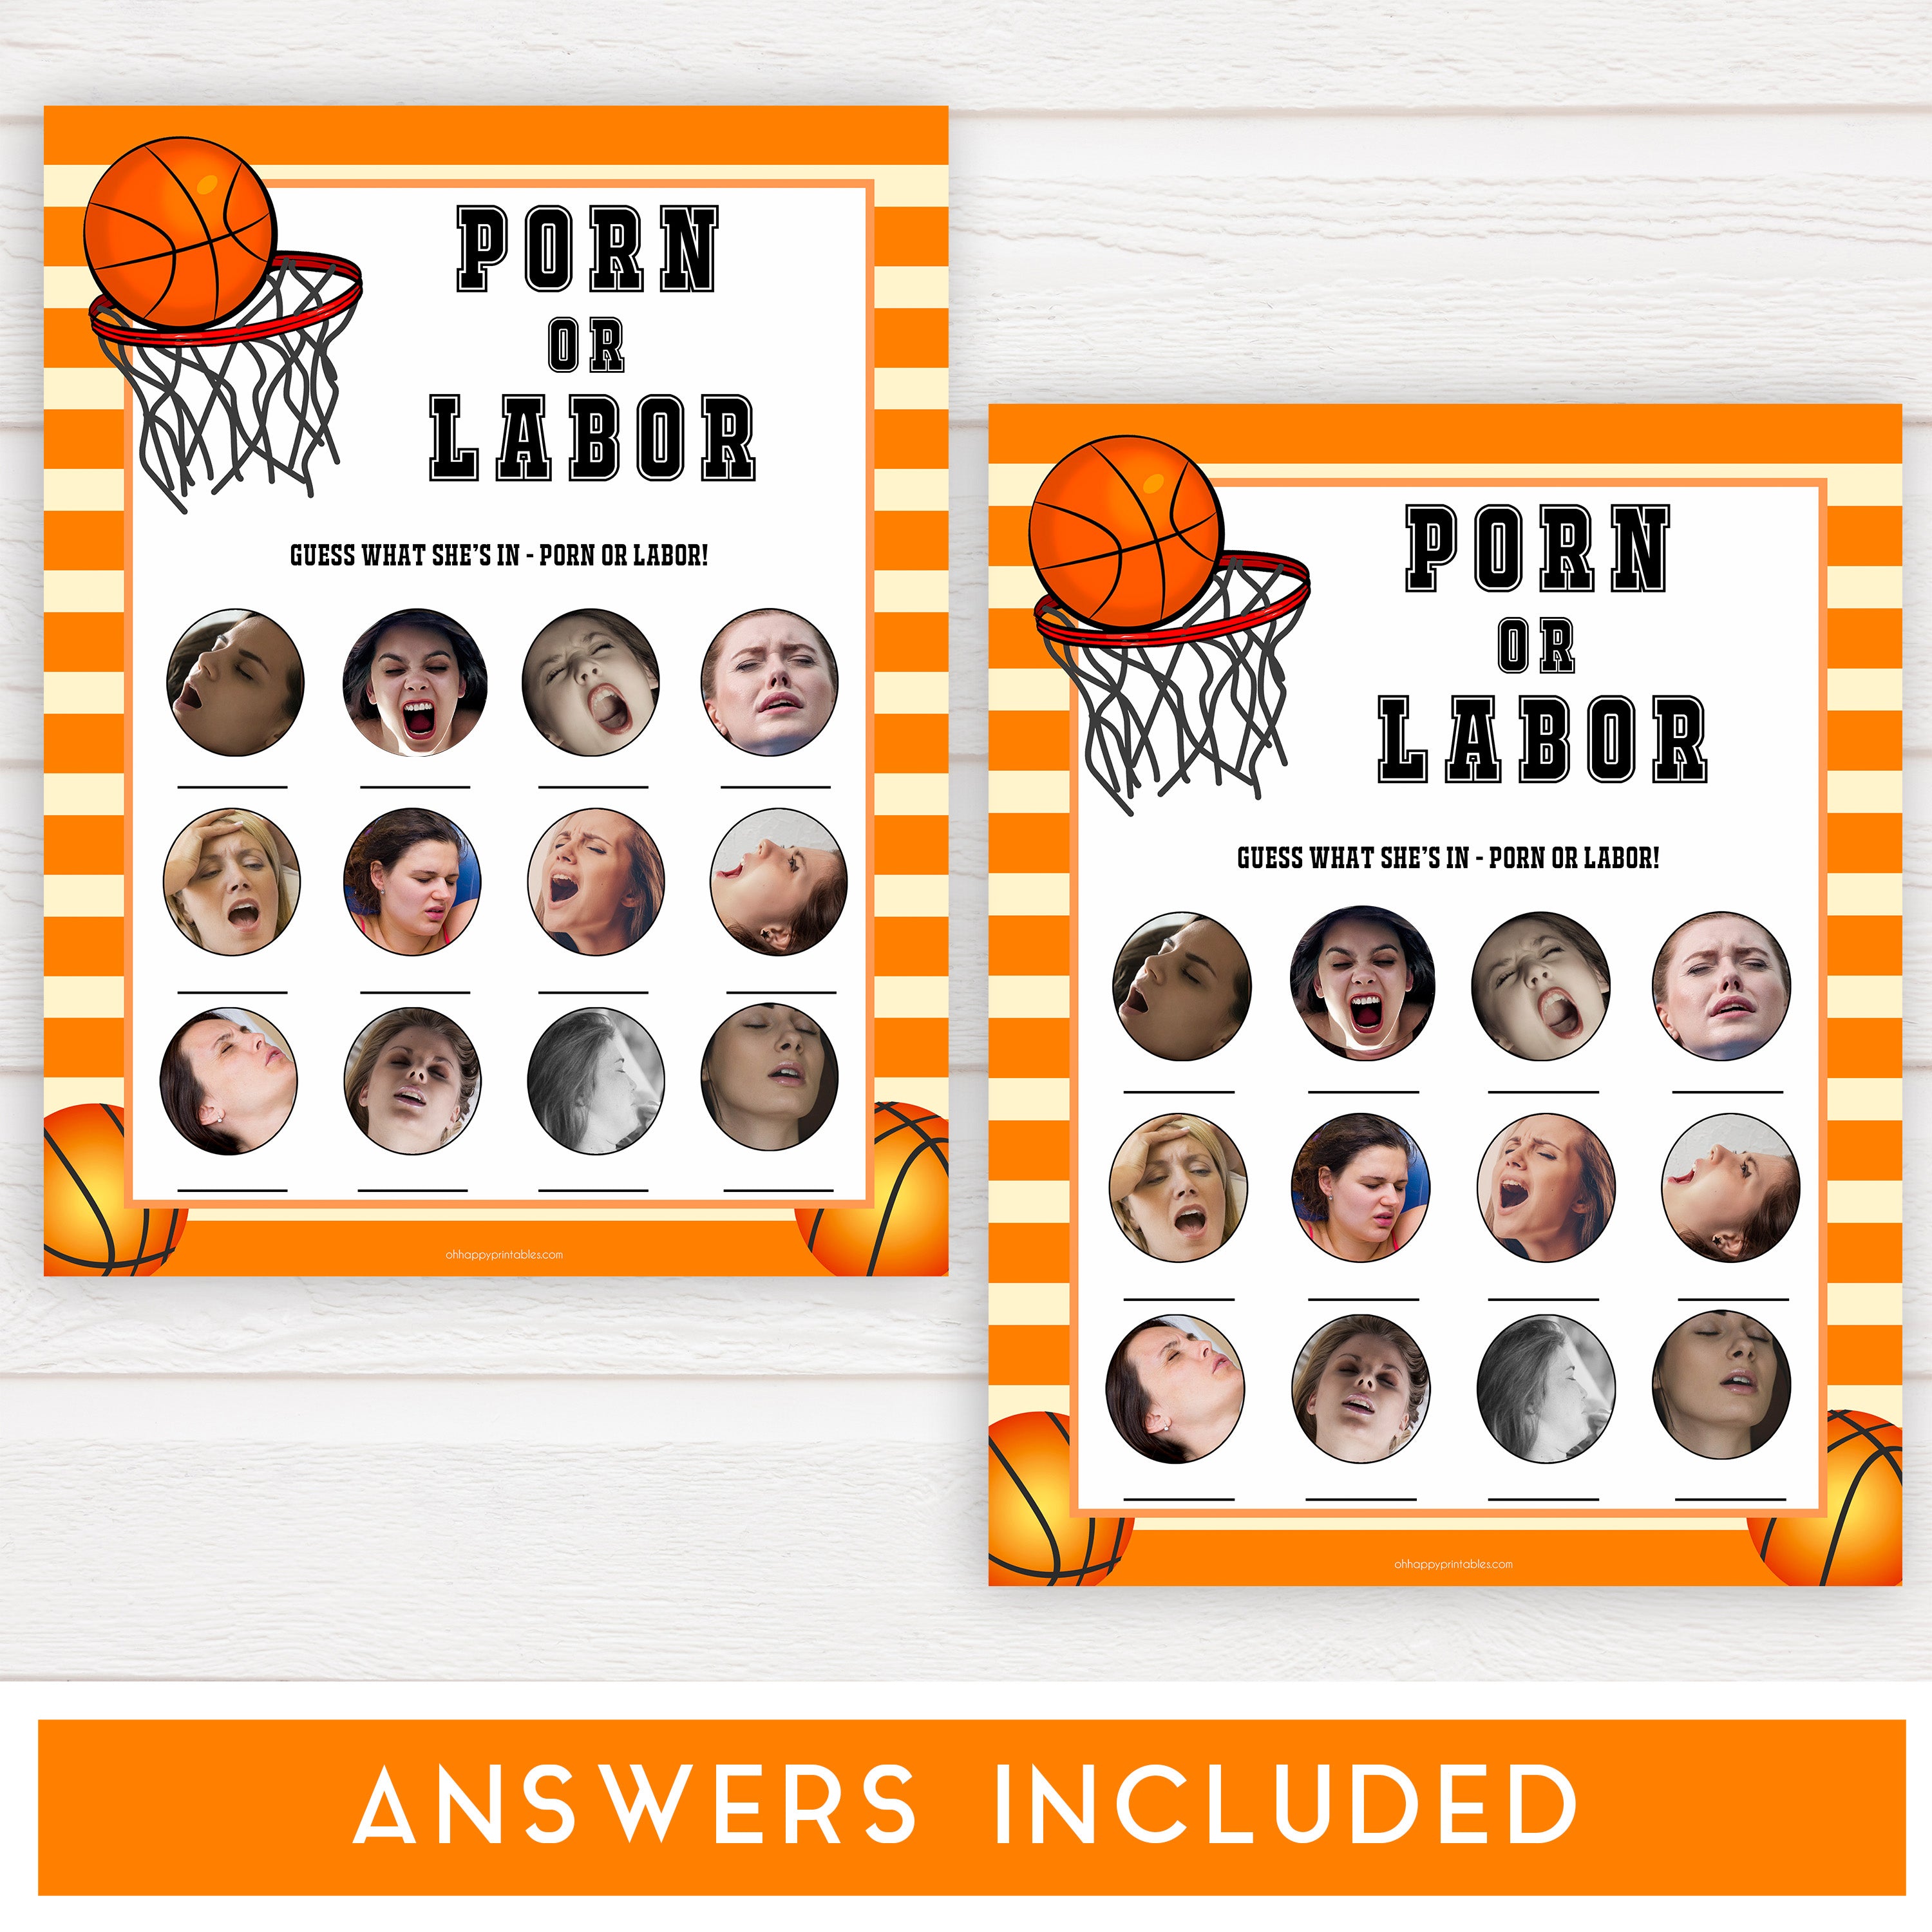 Basketball baby shower games, labor or porn, porn or labour baby game, printable baby games, basket baby games, baby shower games, basketball baby shower idea, fun baby games, popular baby games